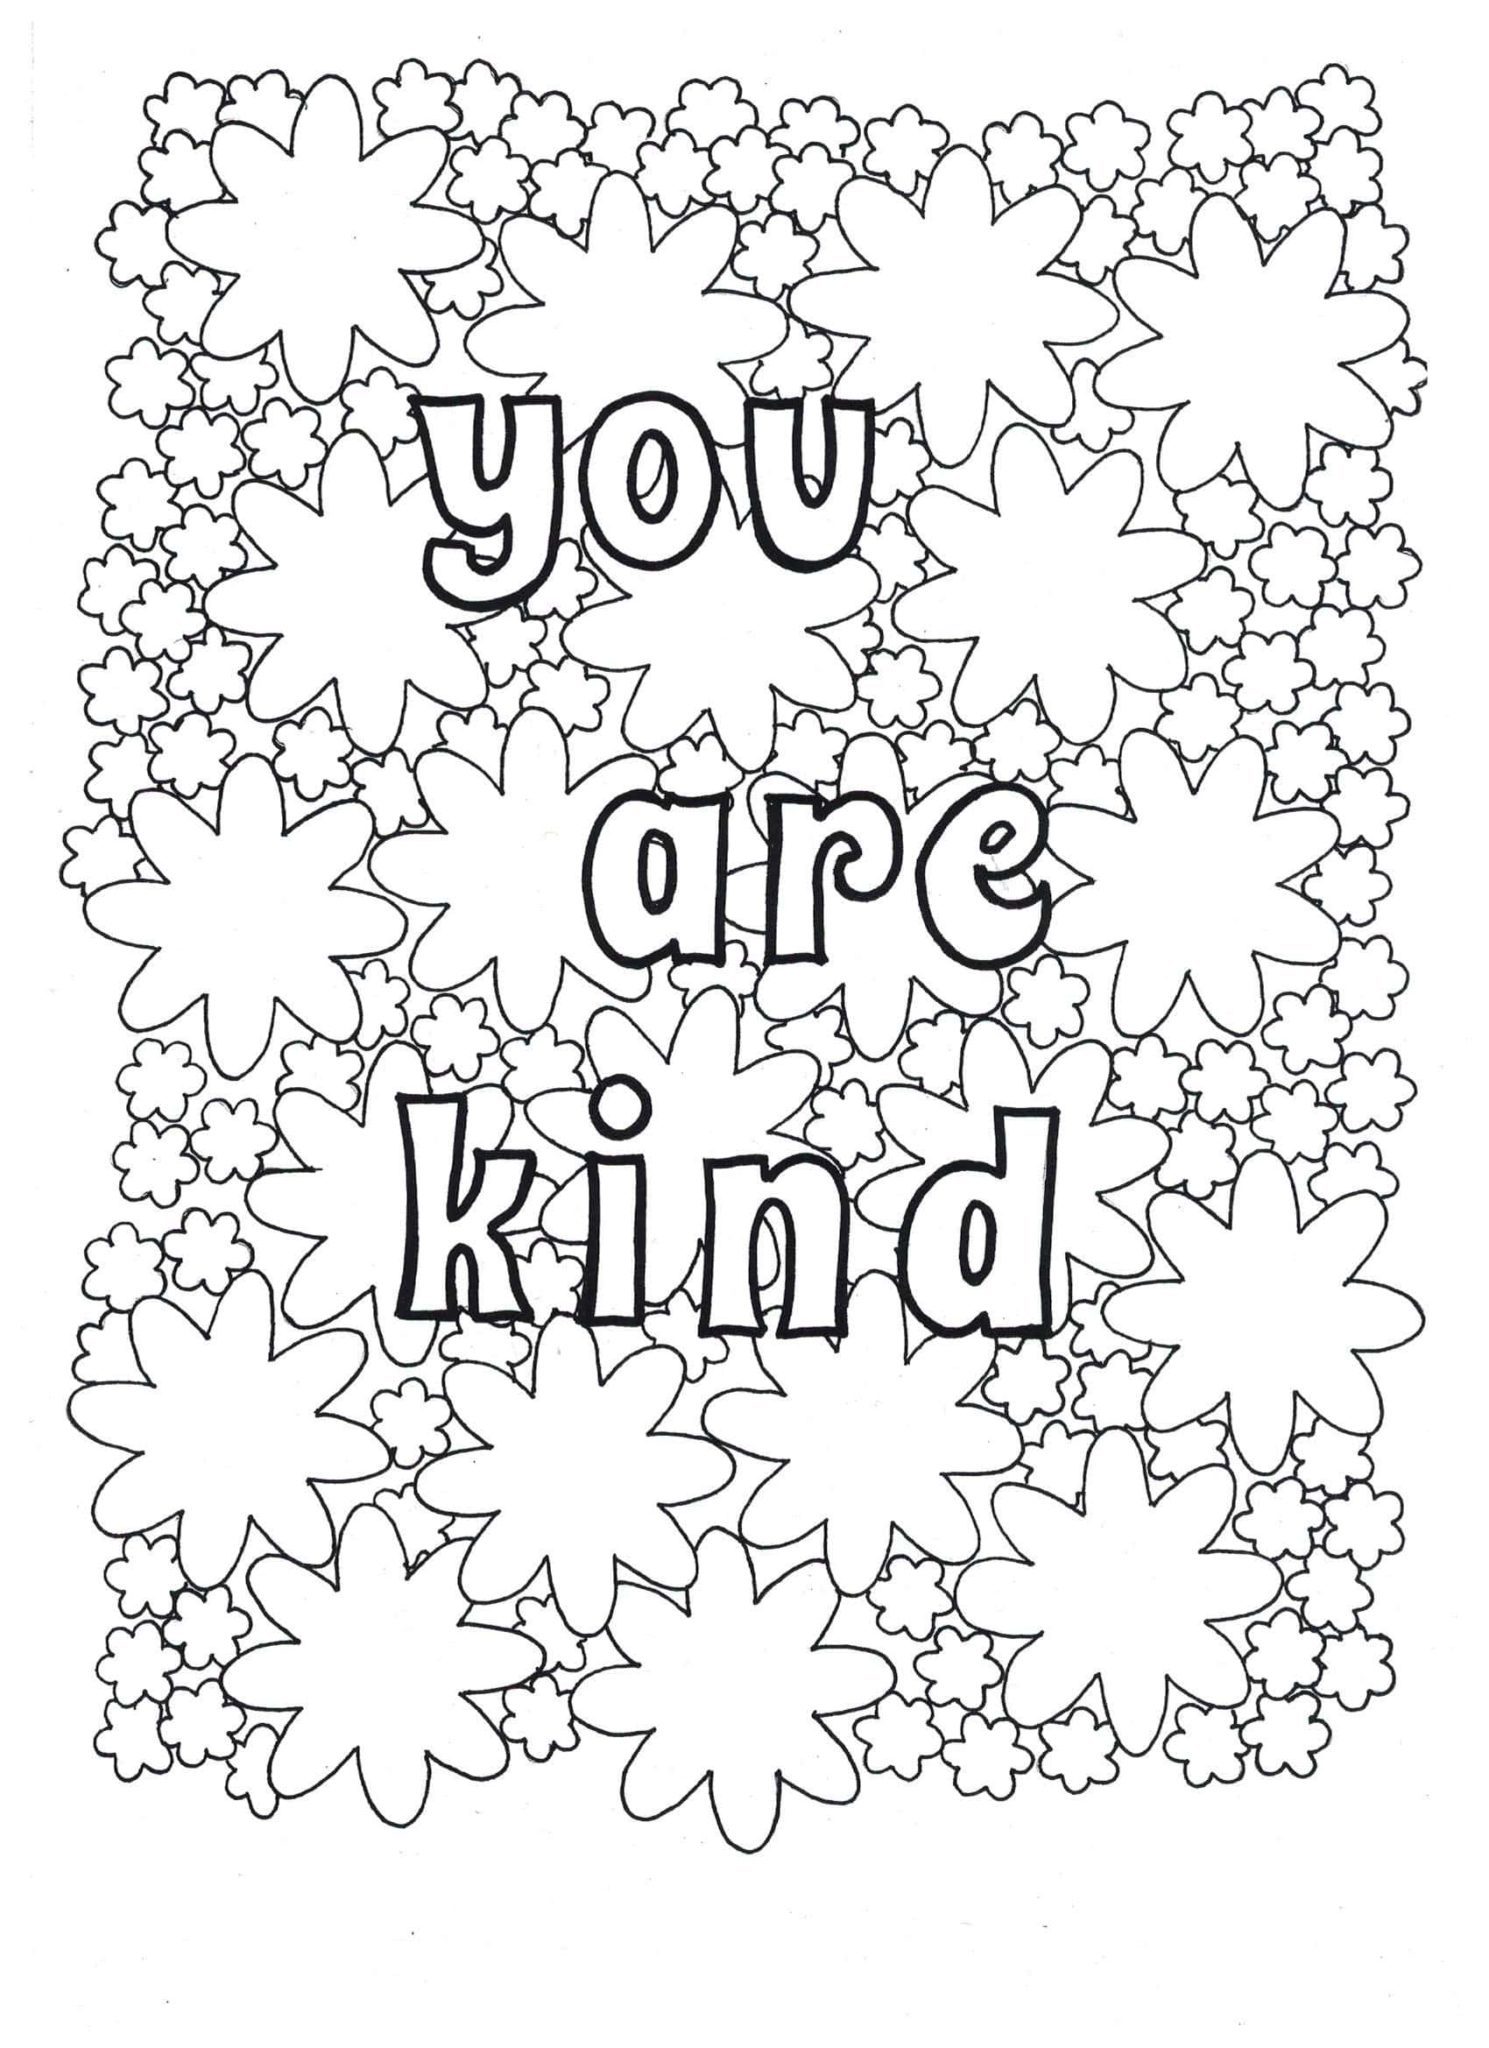 20 Printable Kindness Coloring Pages for Children or Students ...